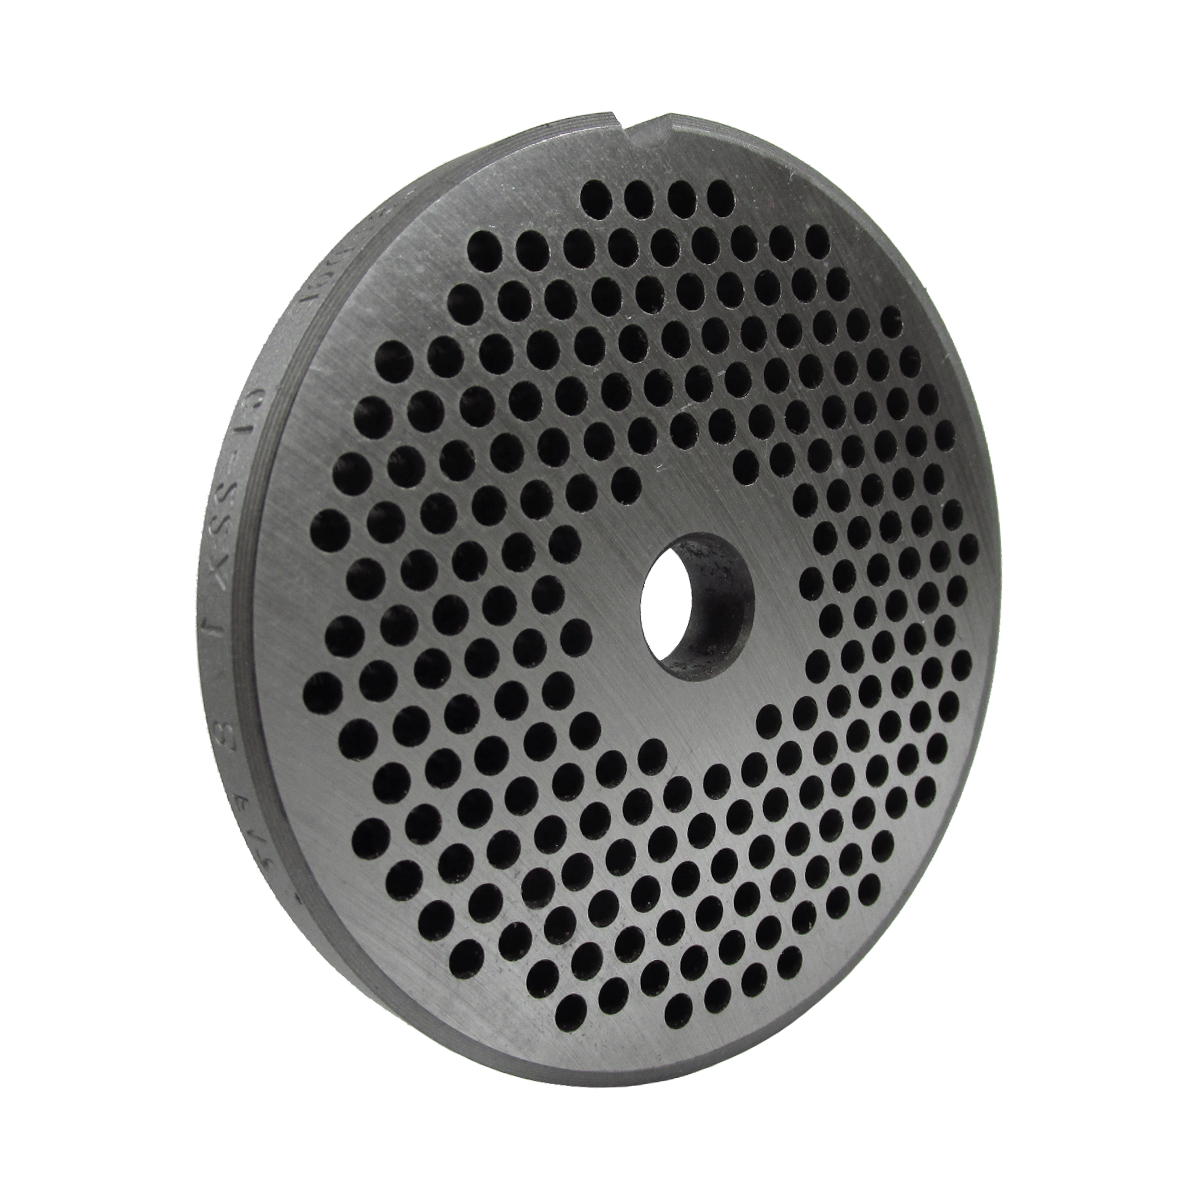 Grinder plate for #22 grinders with 1/8" hole, reversible